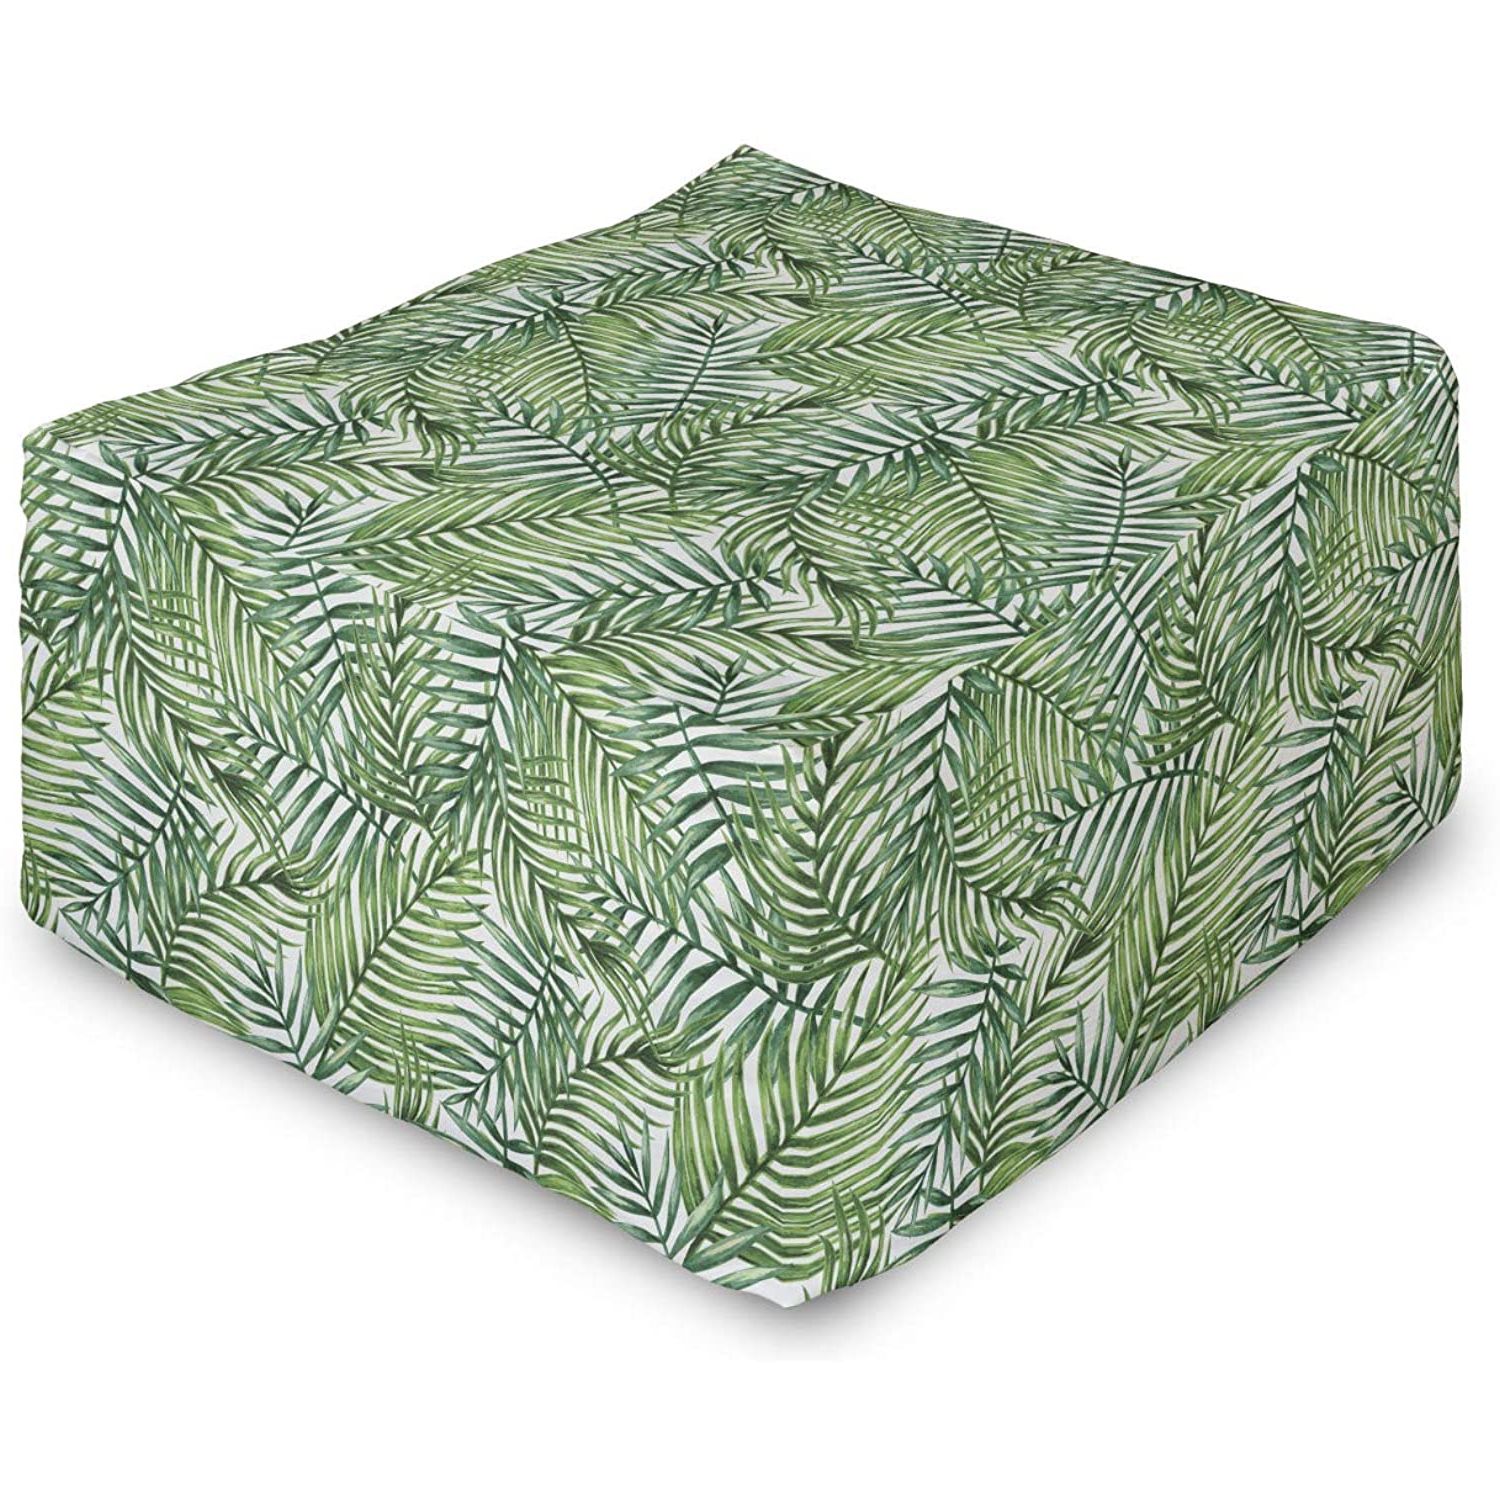 Fashionable Beige And Dark Gray Ombre Cylinder Pouf Ottomans With Regard To Amazon: Ambesonne Leaf Rectangle Pouf, Watercolor Print Botanical (View 9 of 10)